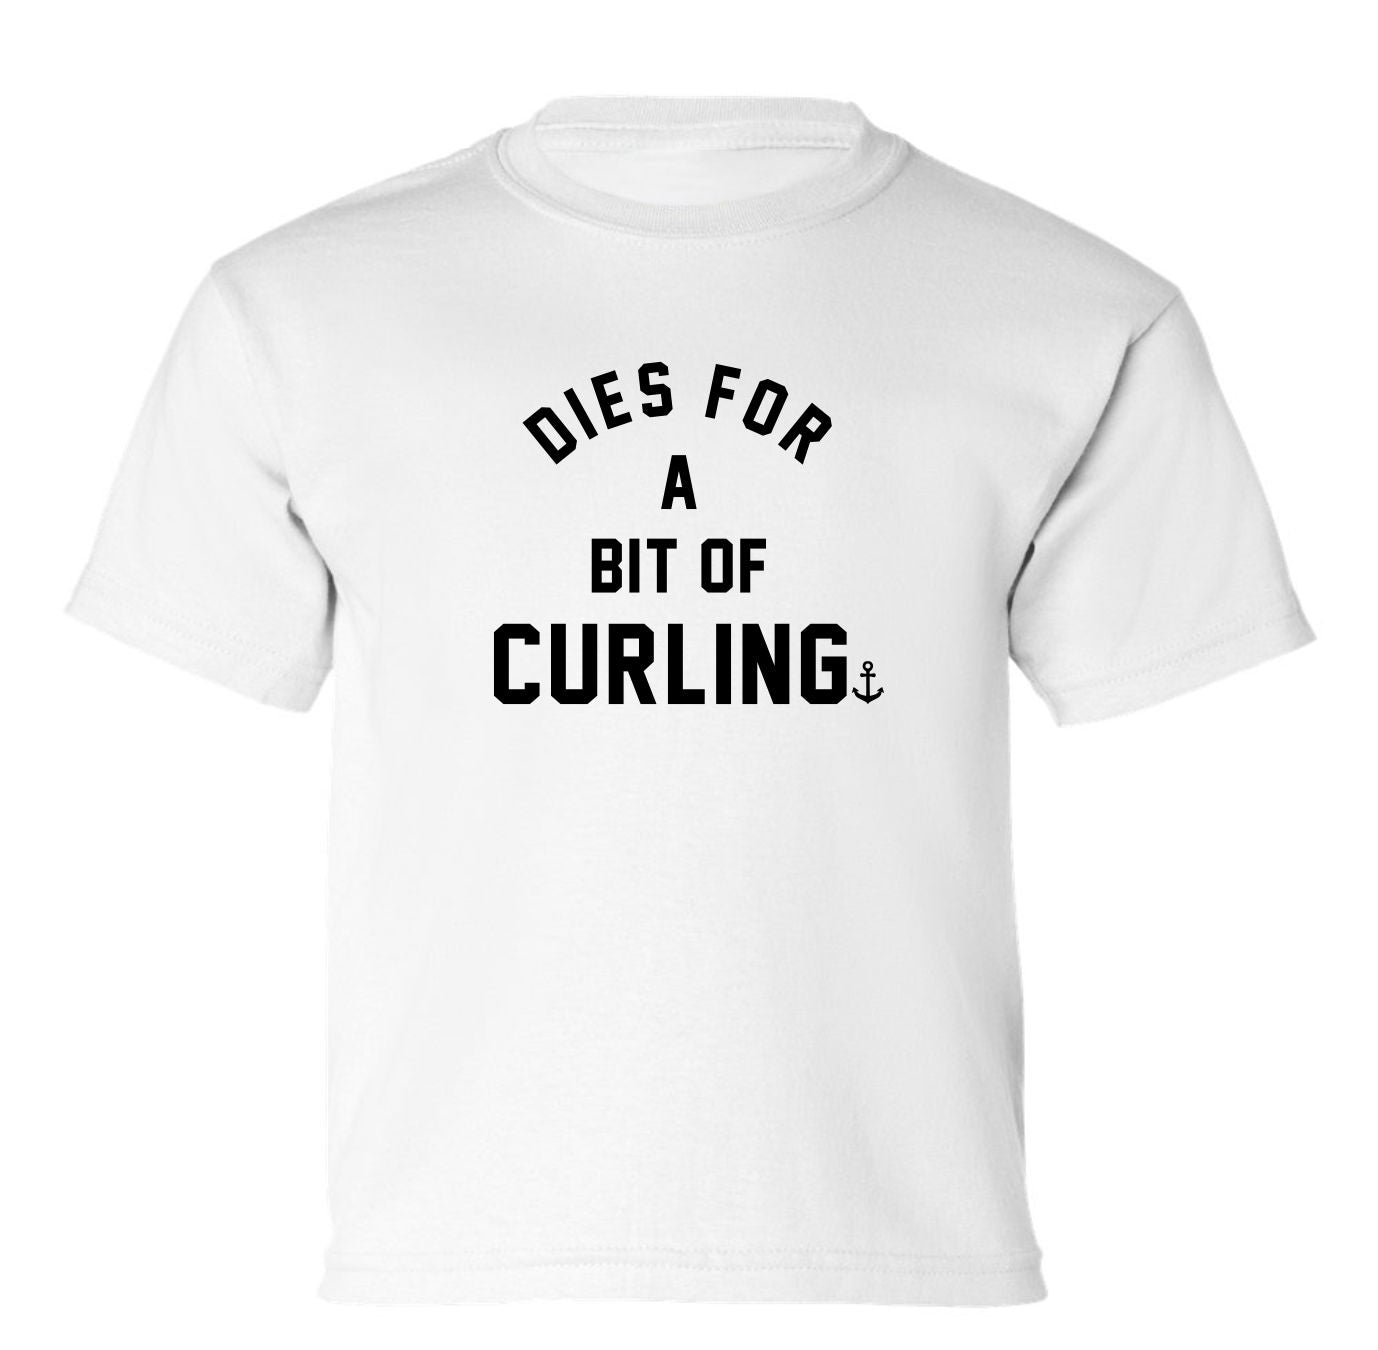 "Dies For A Bit Of Curling" Toddler/Youth T-Shirt